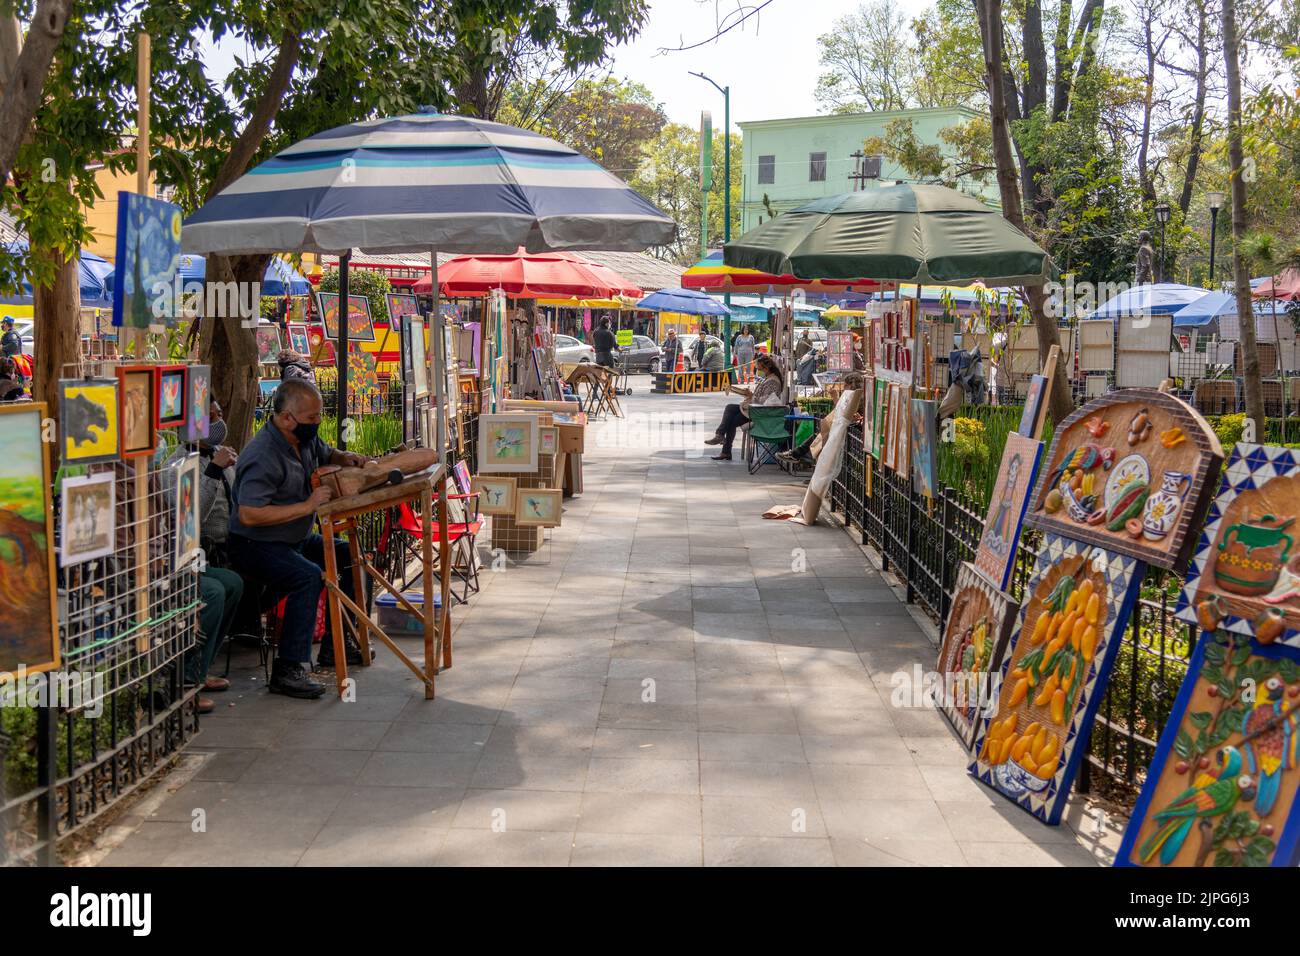 Painters and artists selling their artwork in a park in Coyoacan, Mexico City, Mexico Stock Photo